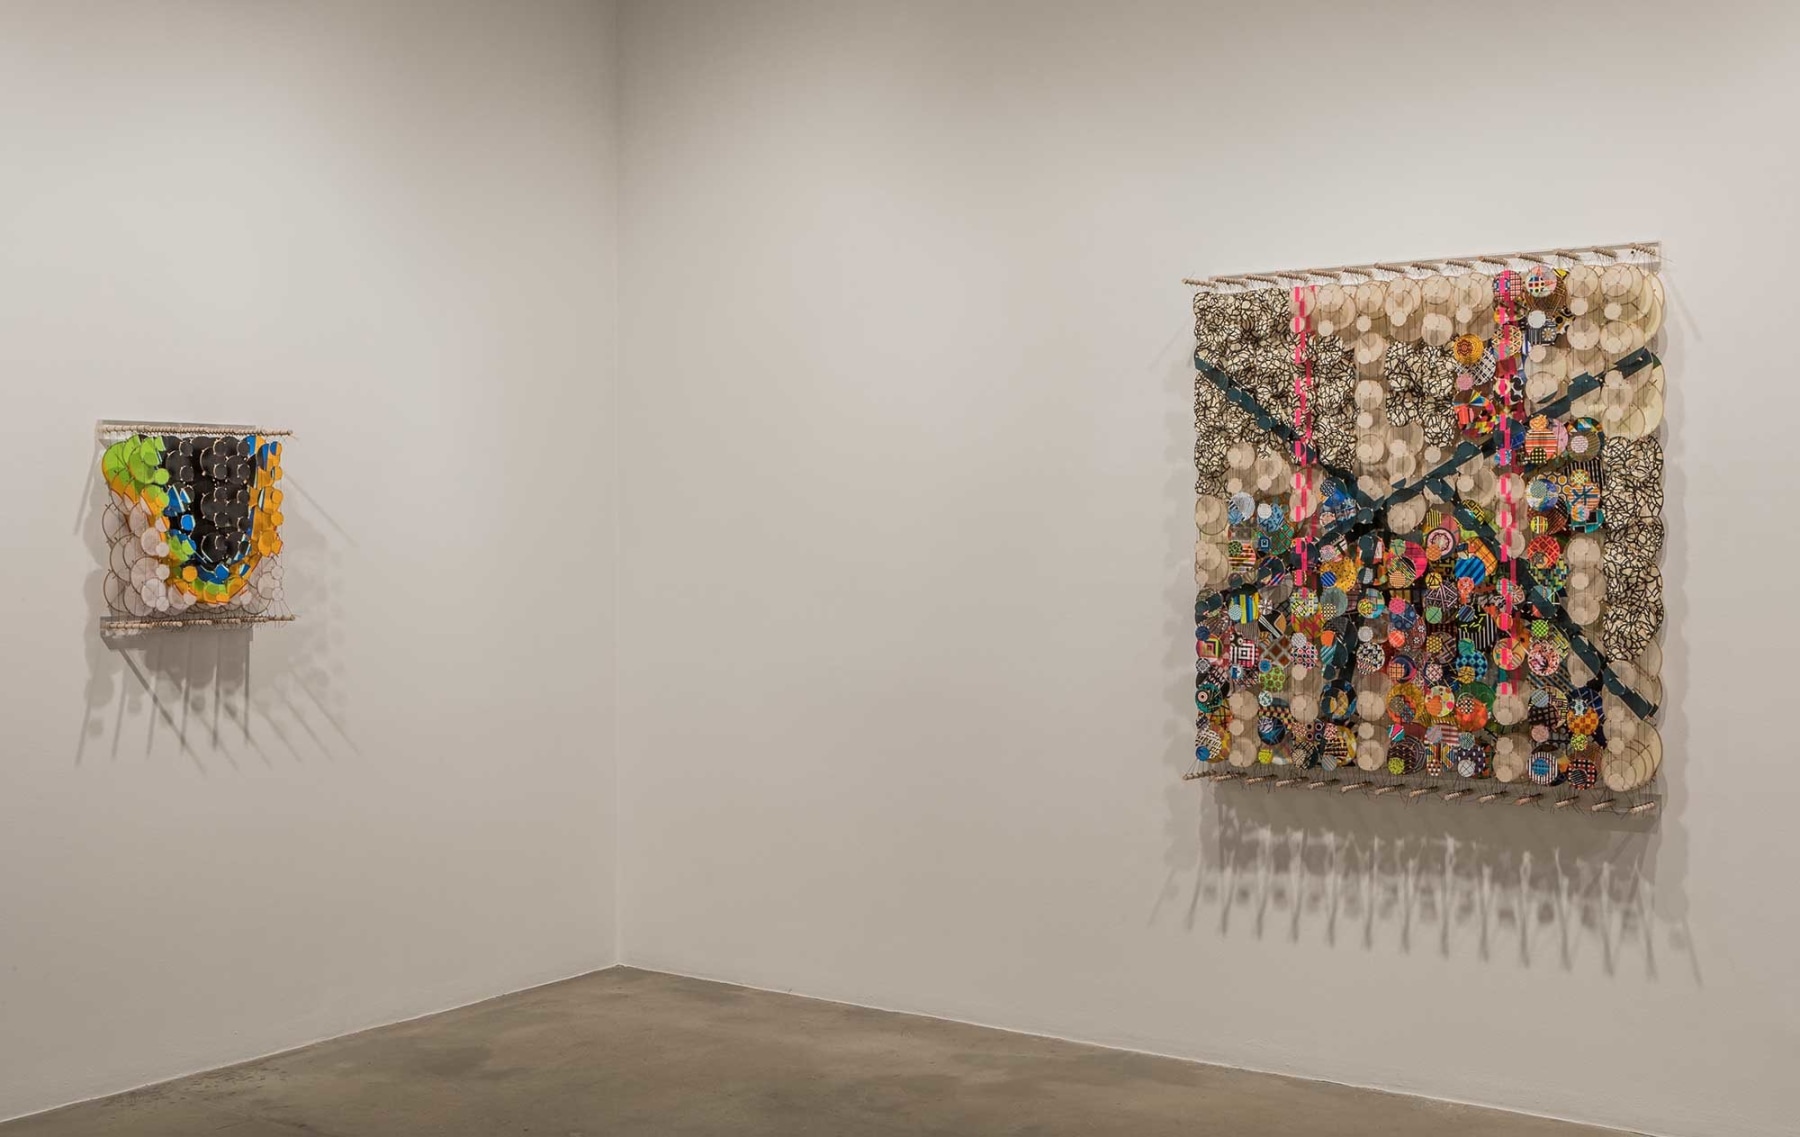 Installation view at Rhona Hoffman Gallery/Jacob Hashimoto/The Dark Isn't The Thing To Worry About/2017